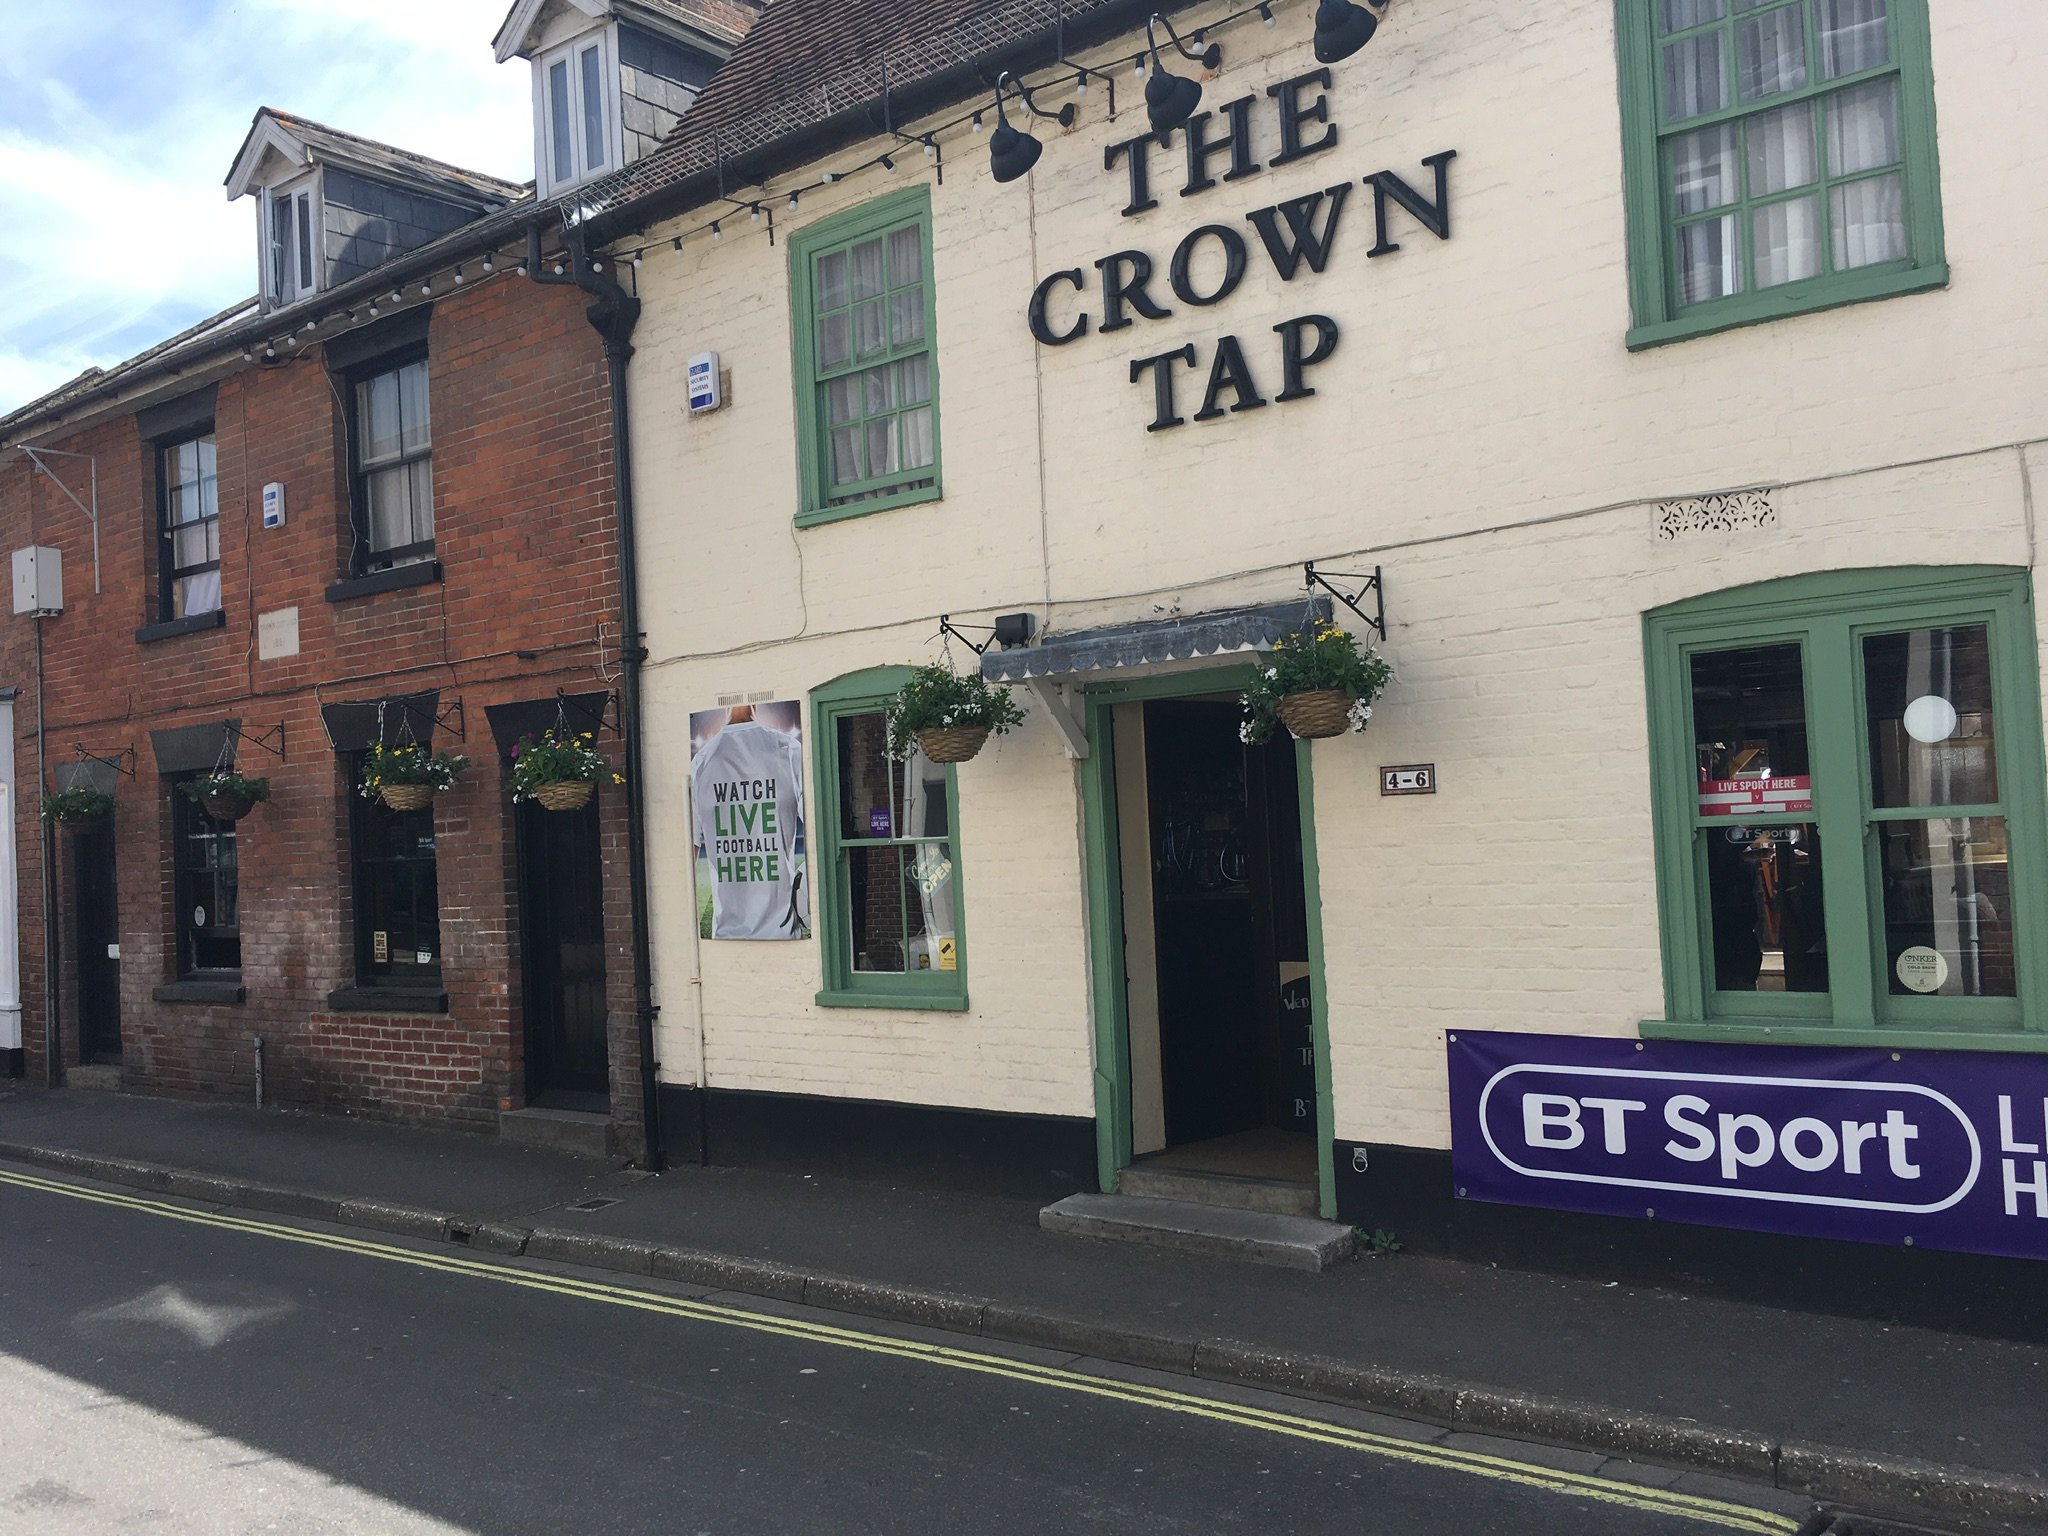 The Crown Tap